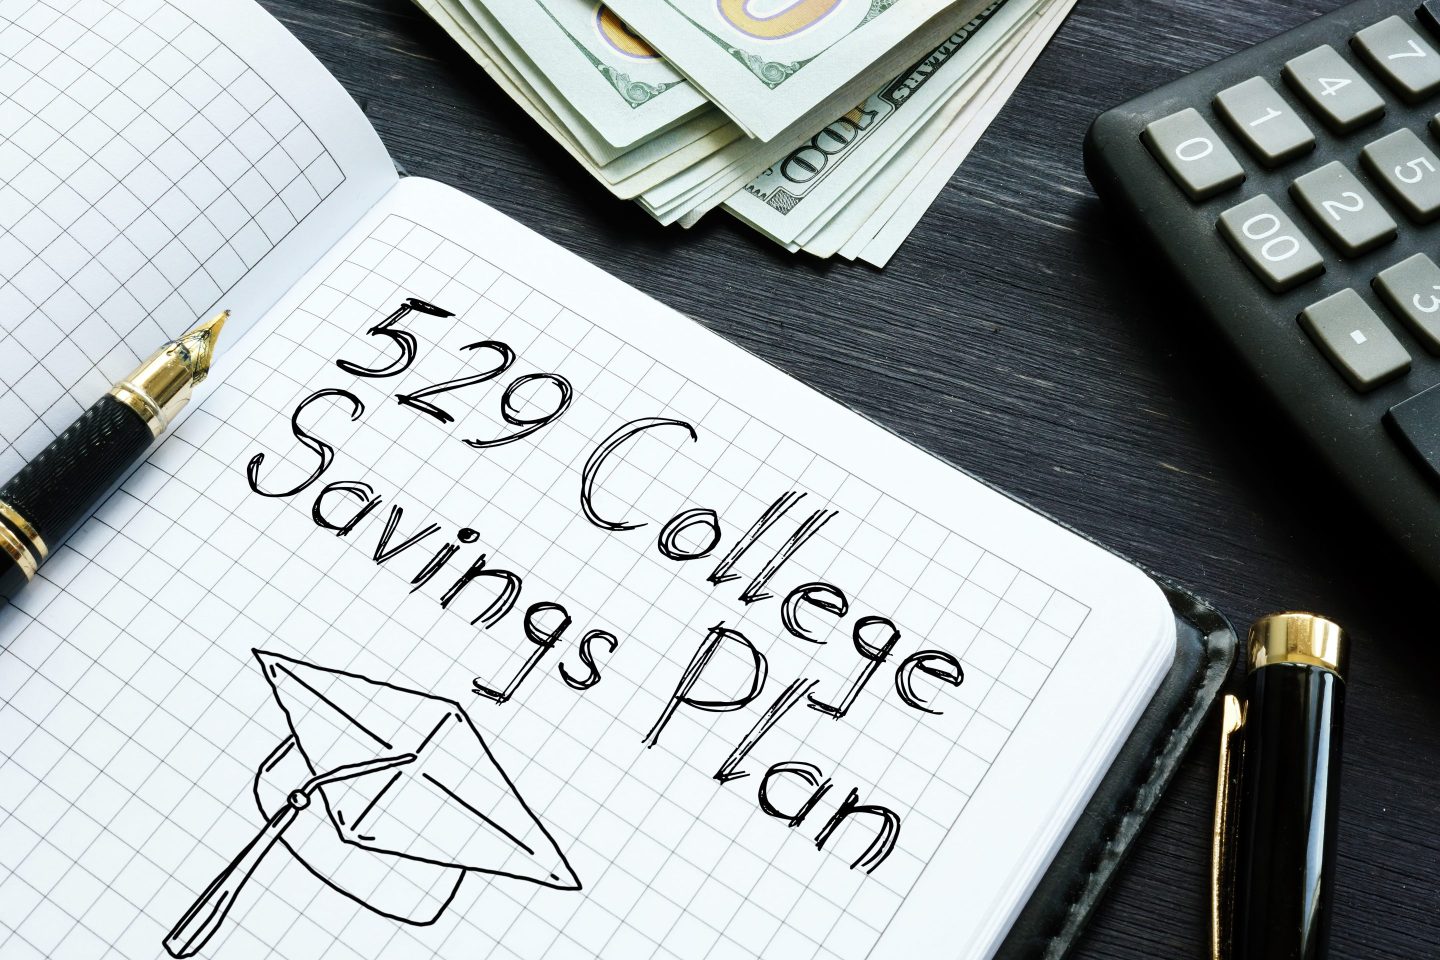 529 College Savings Plan is shown on the conceptual photo using the text